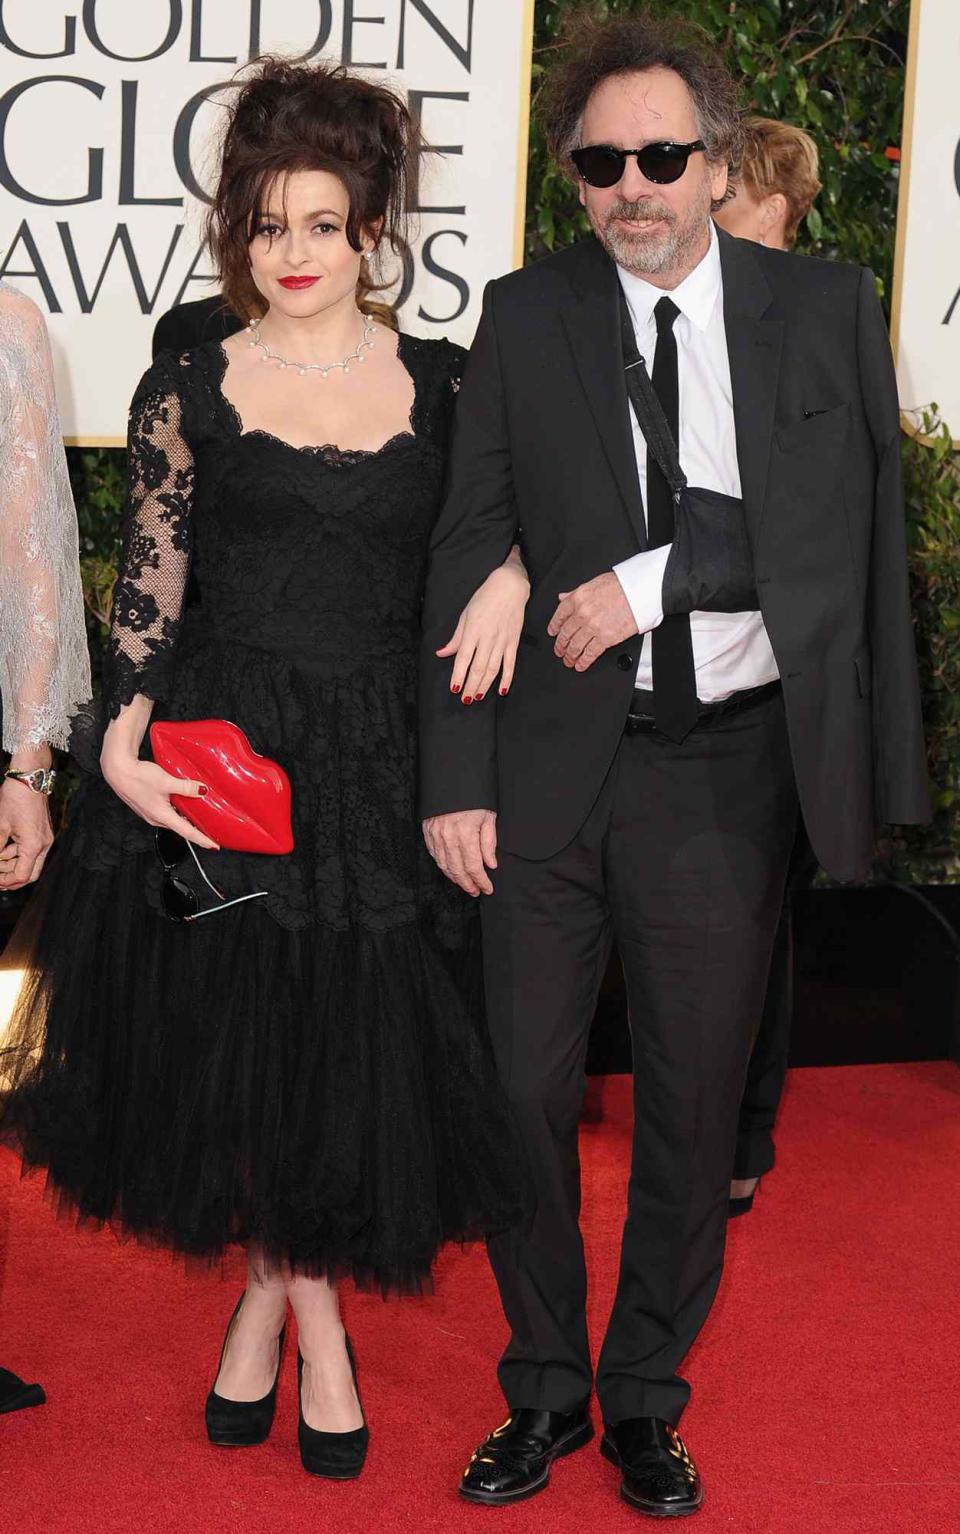 Helena Bonham Carter and director Tim Burton arrive at the 70th Annual Golden Globe Awards held at The Beverly Hilton Hotel on January 13, 2013 in Beverly Hills, California